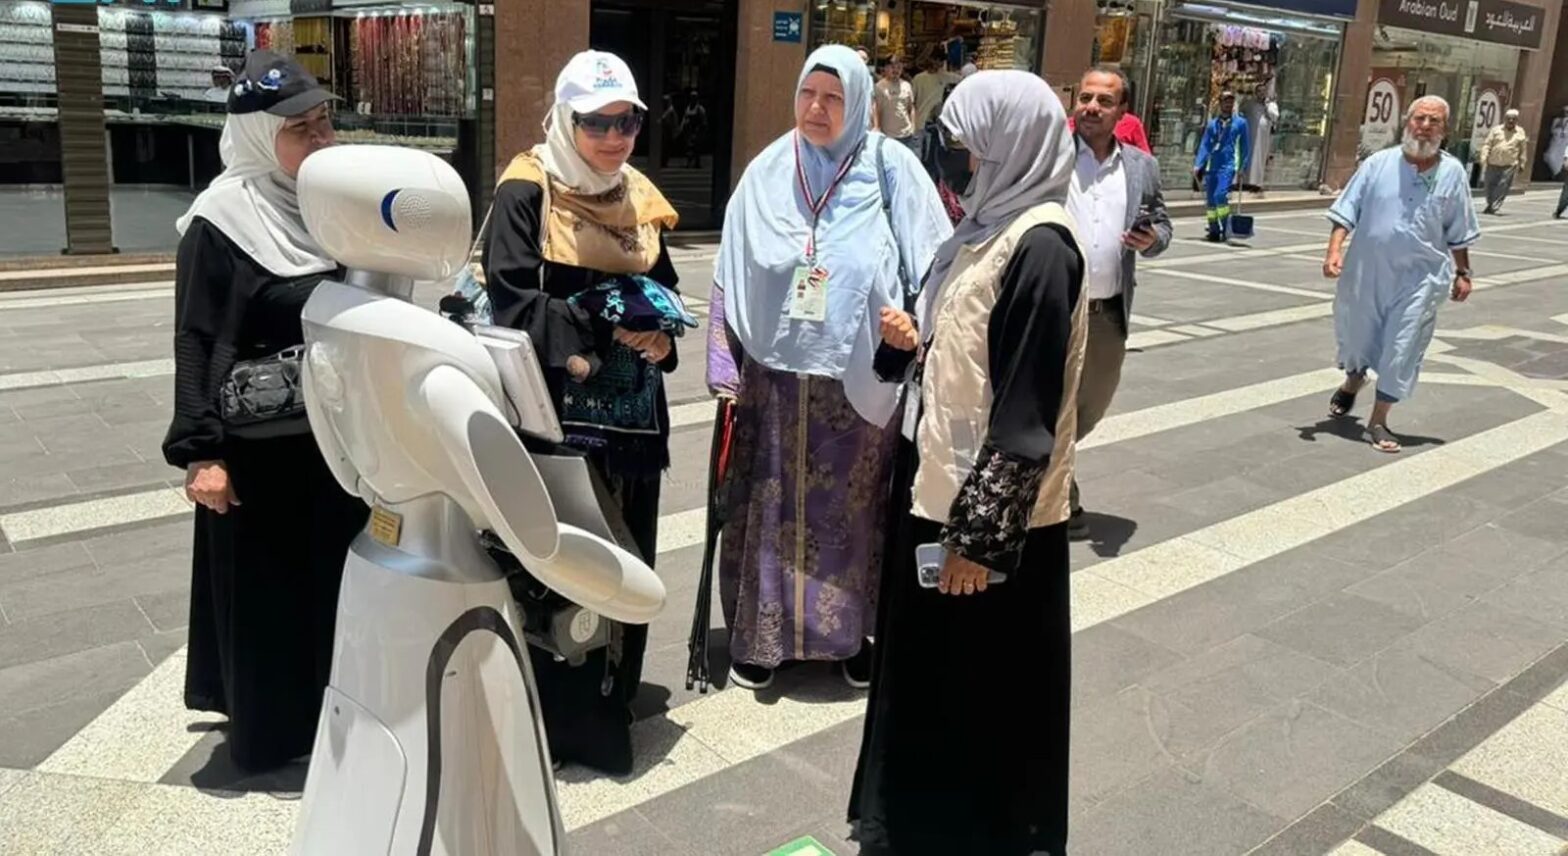 Madinah Health launches smart robot service in central area near Prophet's mosque